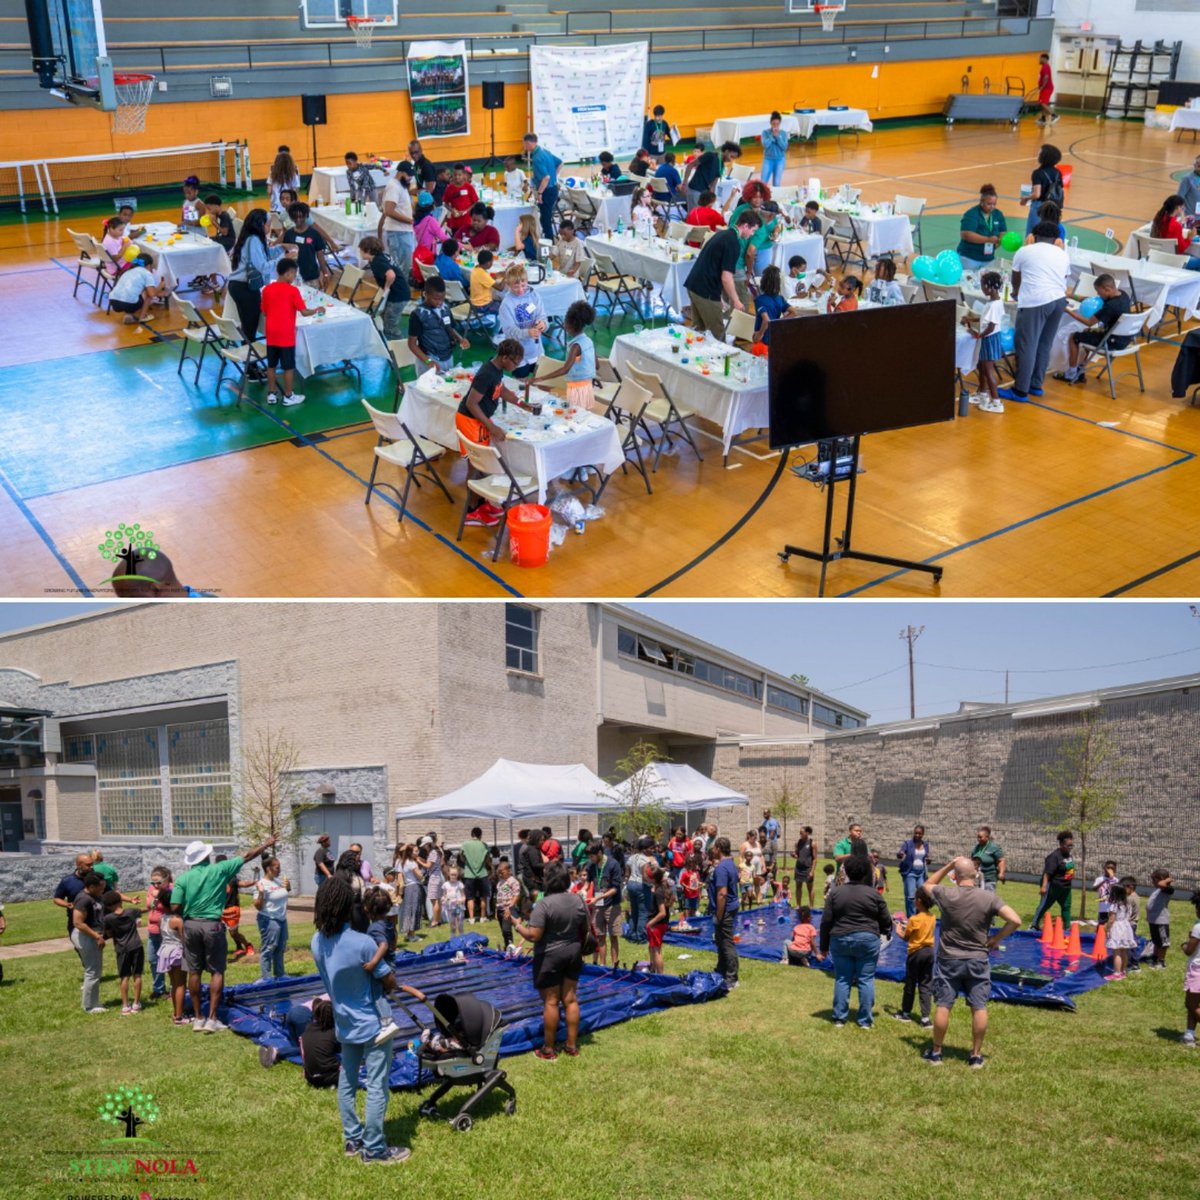 225+ K-12 students, caregivers and volunteers engaged with @STEMNOLA at STEM Saturday: Buoyancy and Density on May 11 at Lyons Rec Center in New Orleans! K-12 students participated in hands-on activities focused on “Buoyancy and Density.” Students designed, built and tested